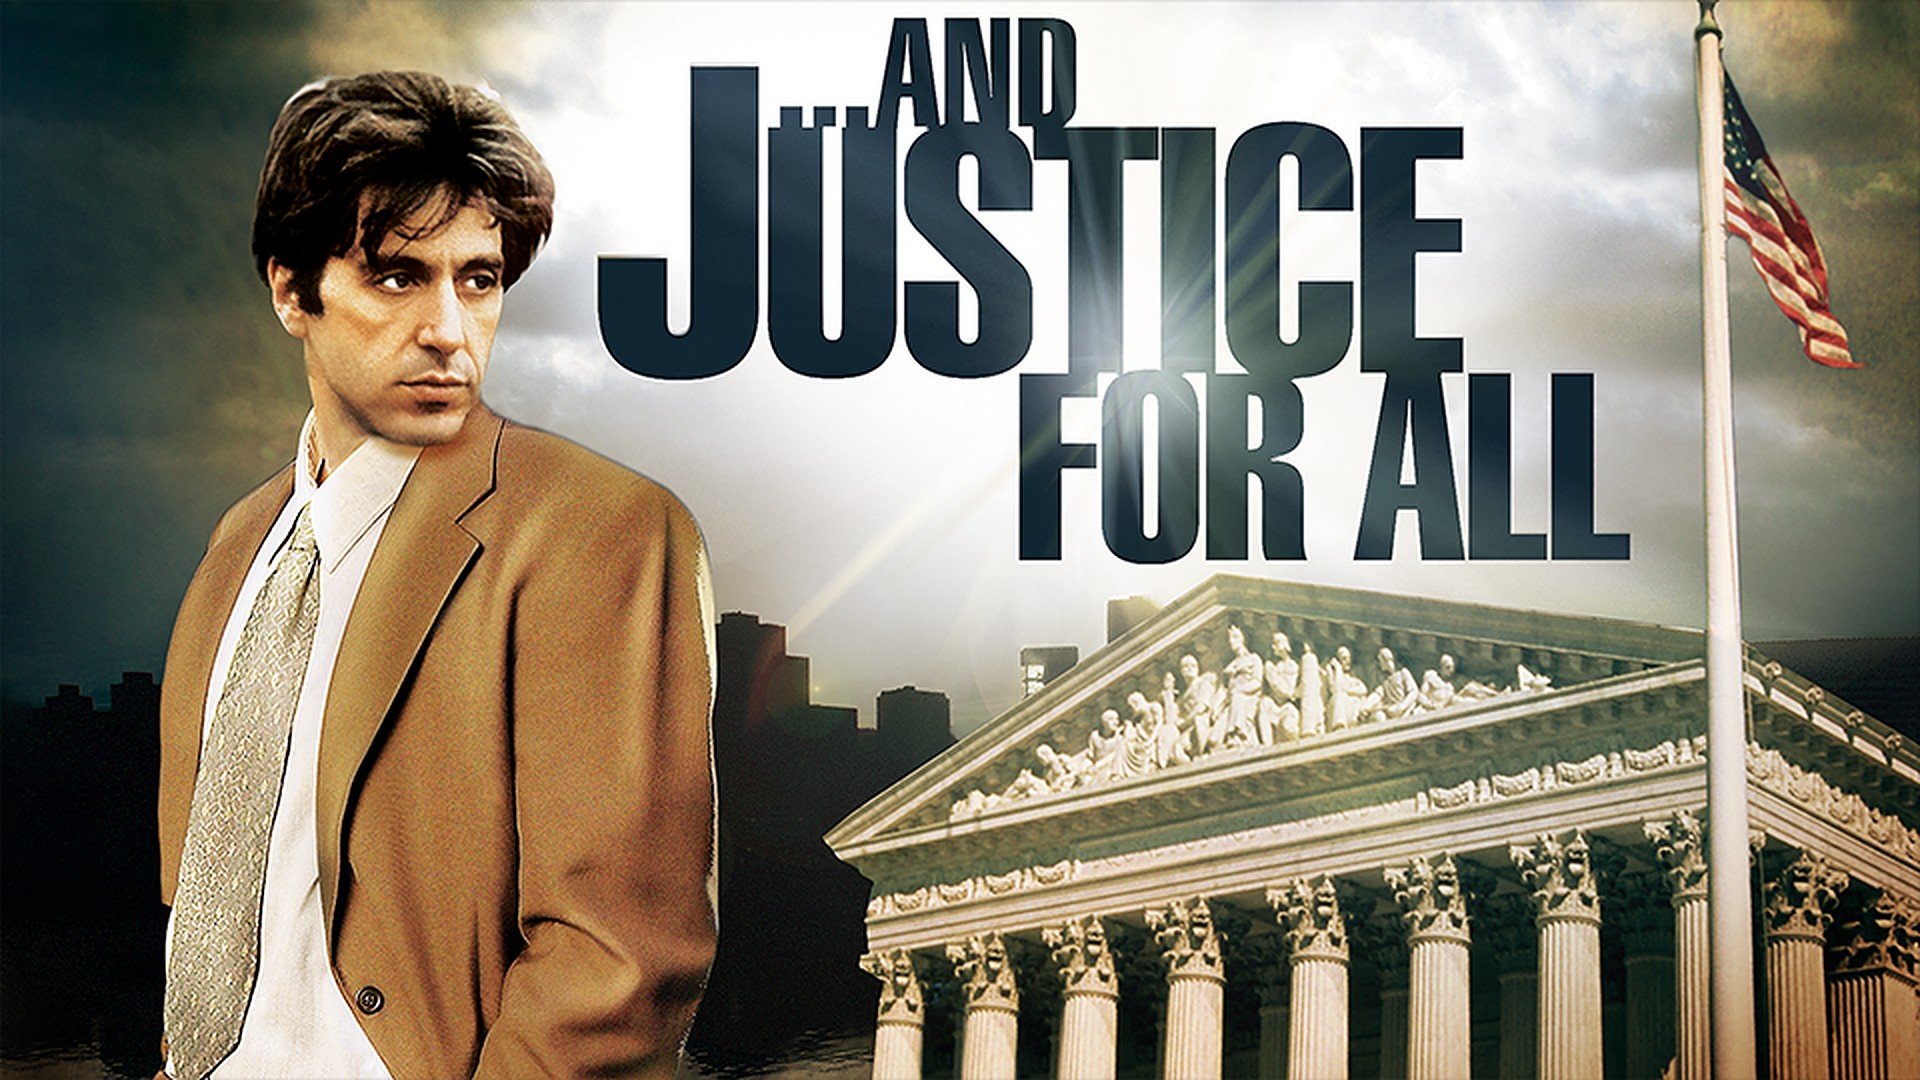 38-facts-about-the-movie-and-justice-for-all